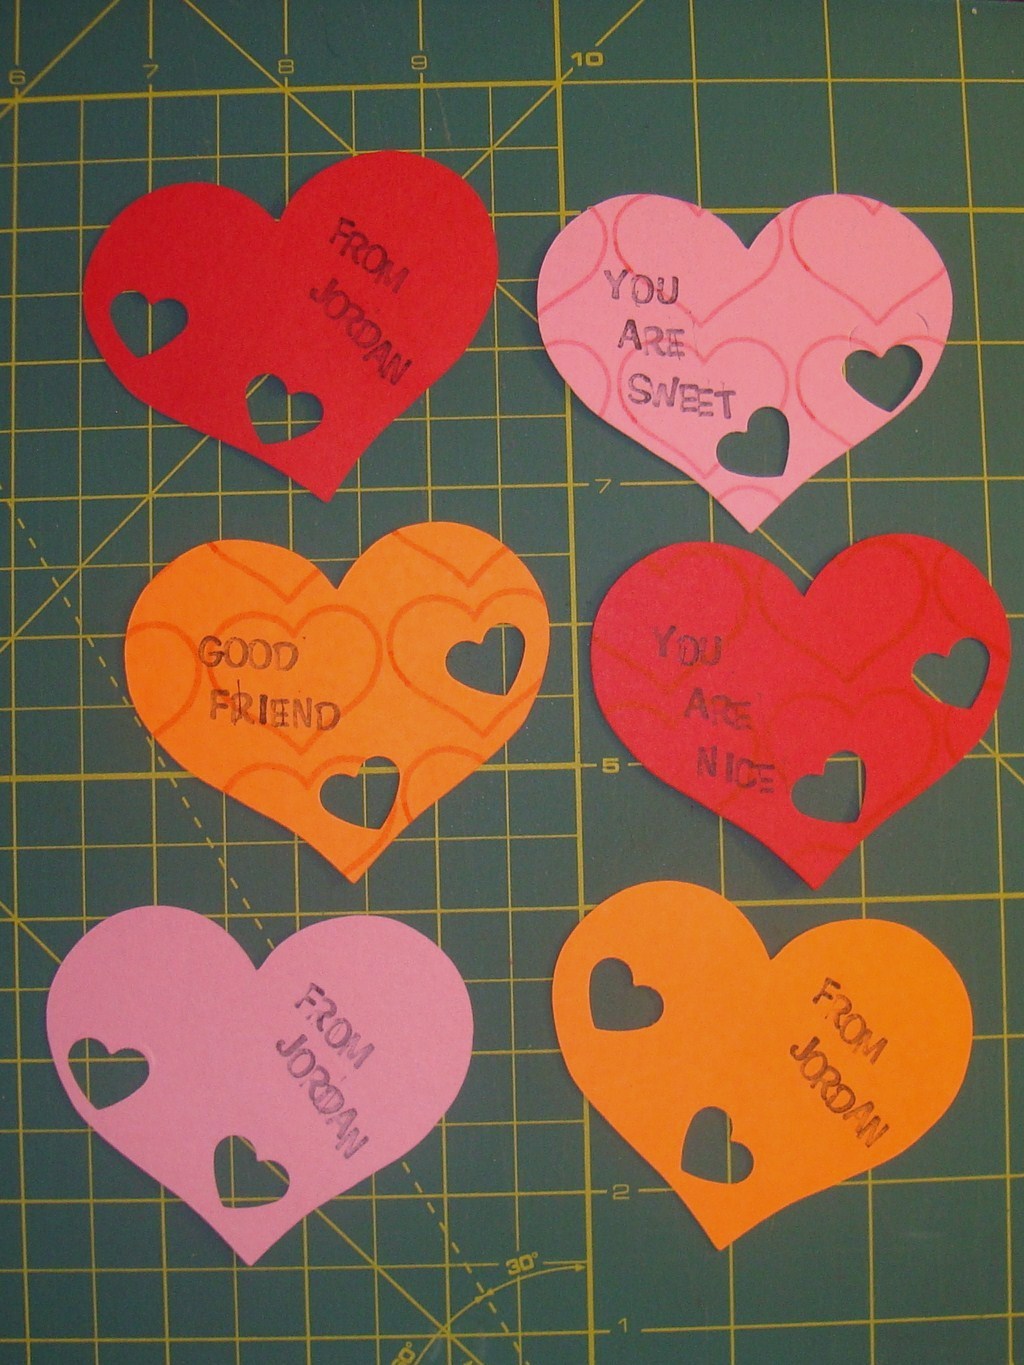 Handmade Happiness Kids Valentine's Cards with the Cricut